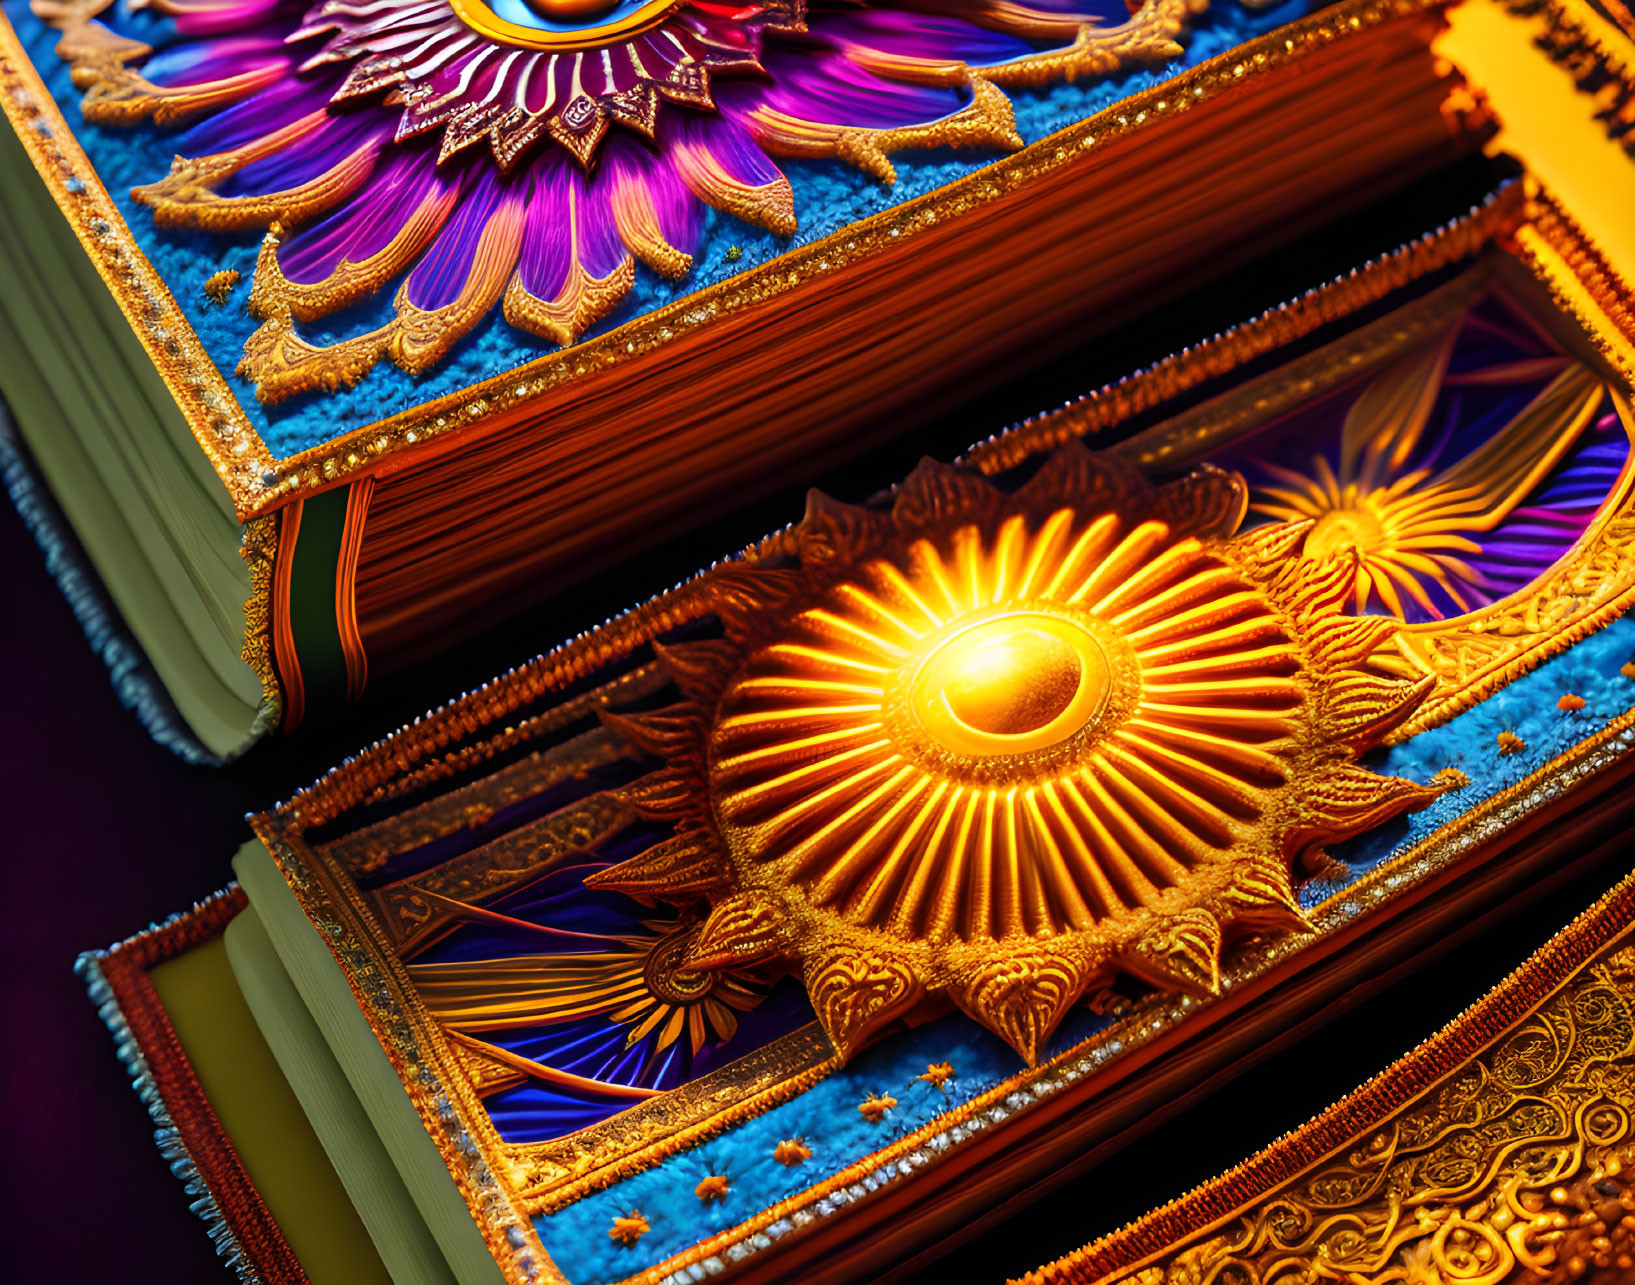 Colorful ornate book with golden edges and mandala designs on cover and pages